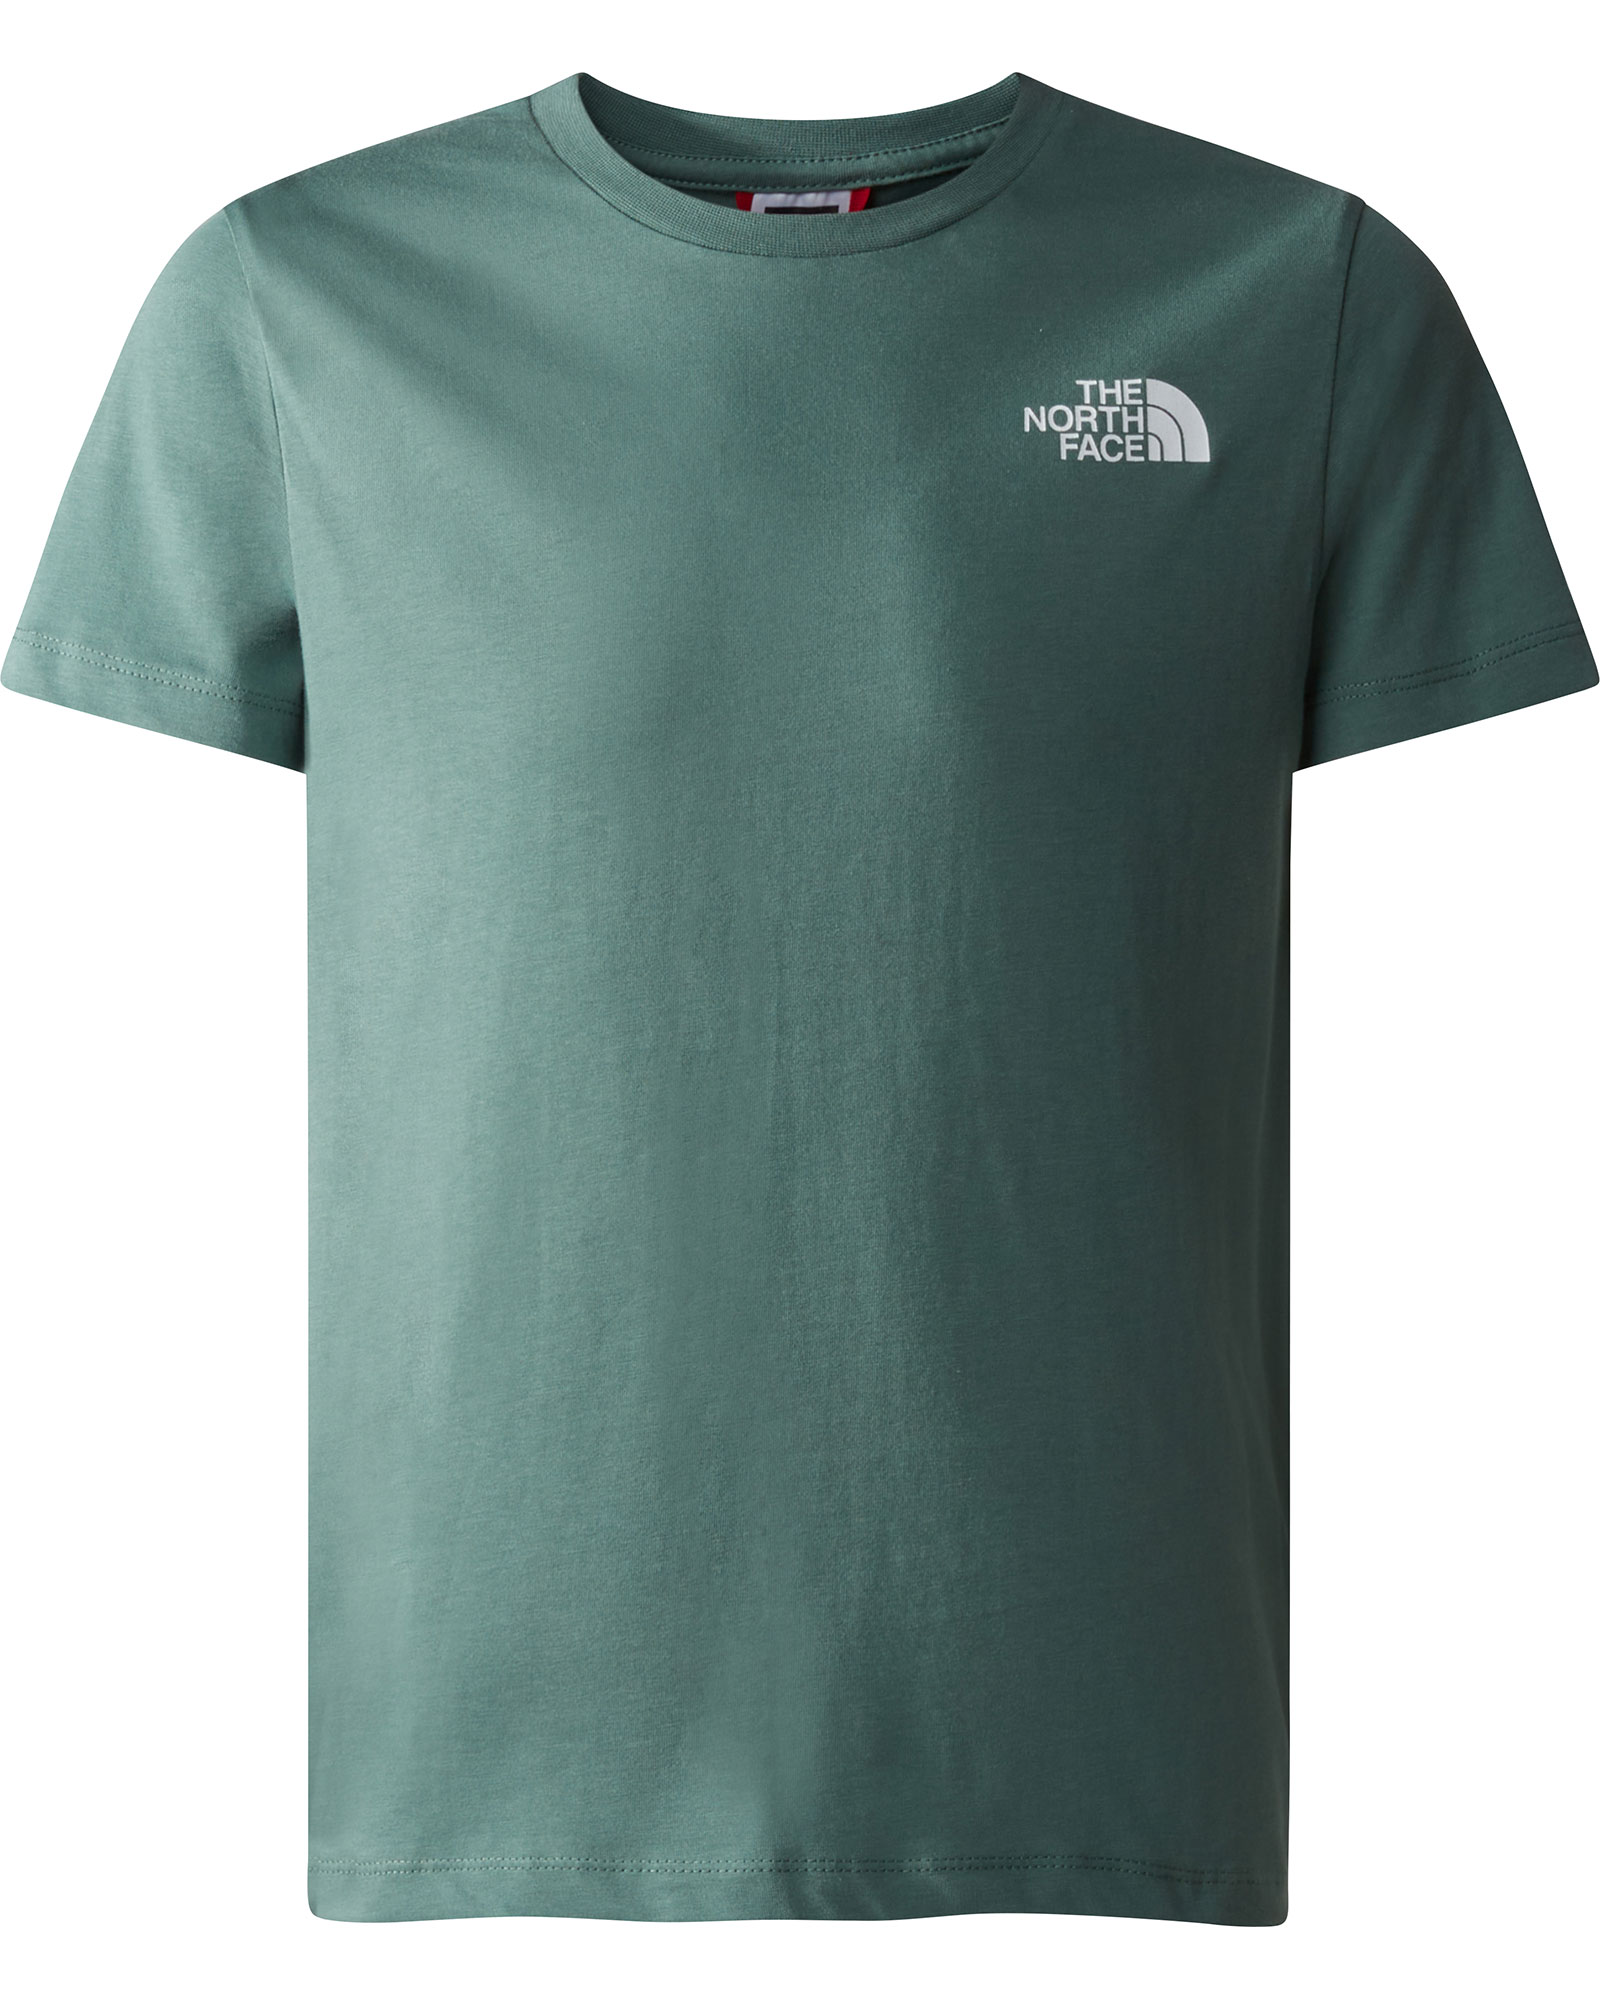 The North Face Youth Simple Dome T Shirt - Dark Sage L